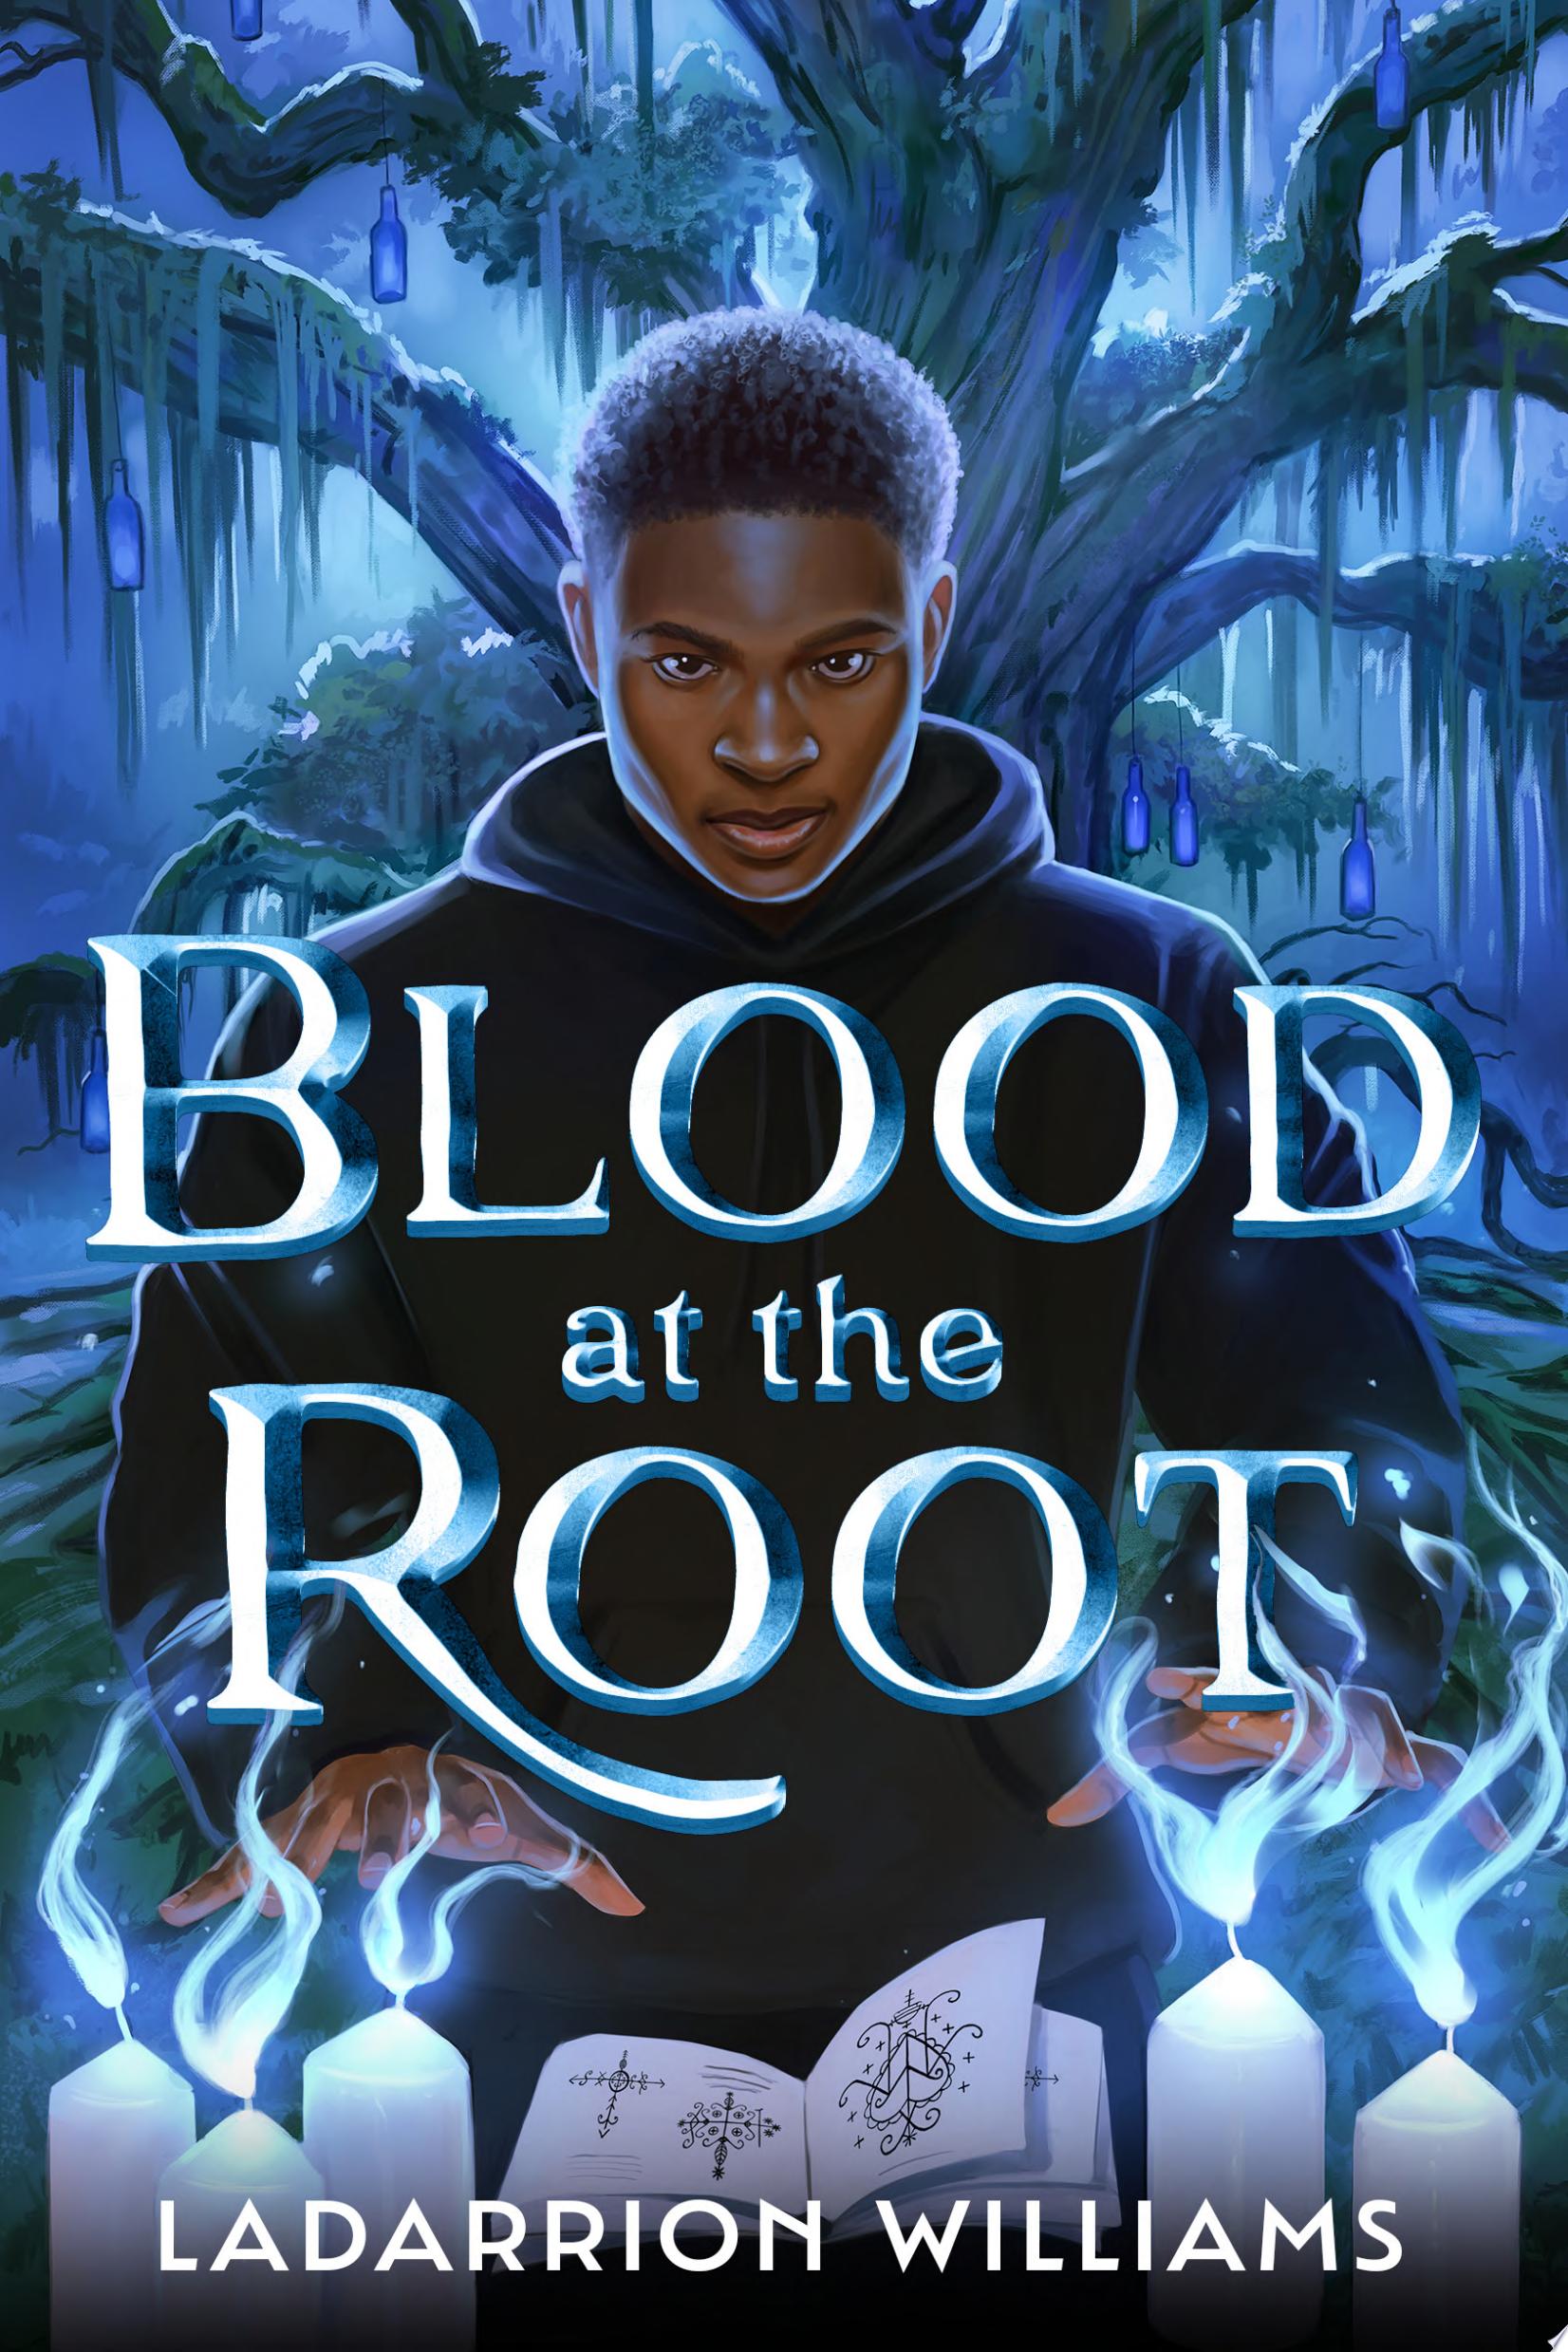 Image for "Blood at the Root"